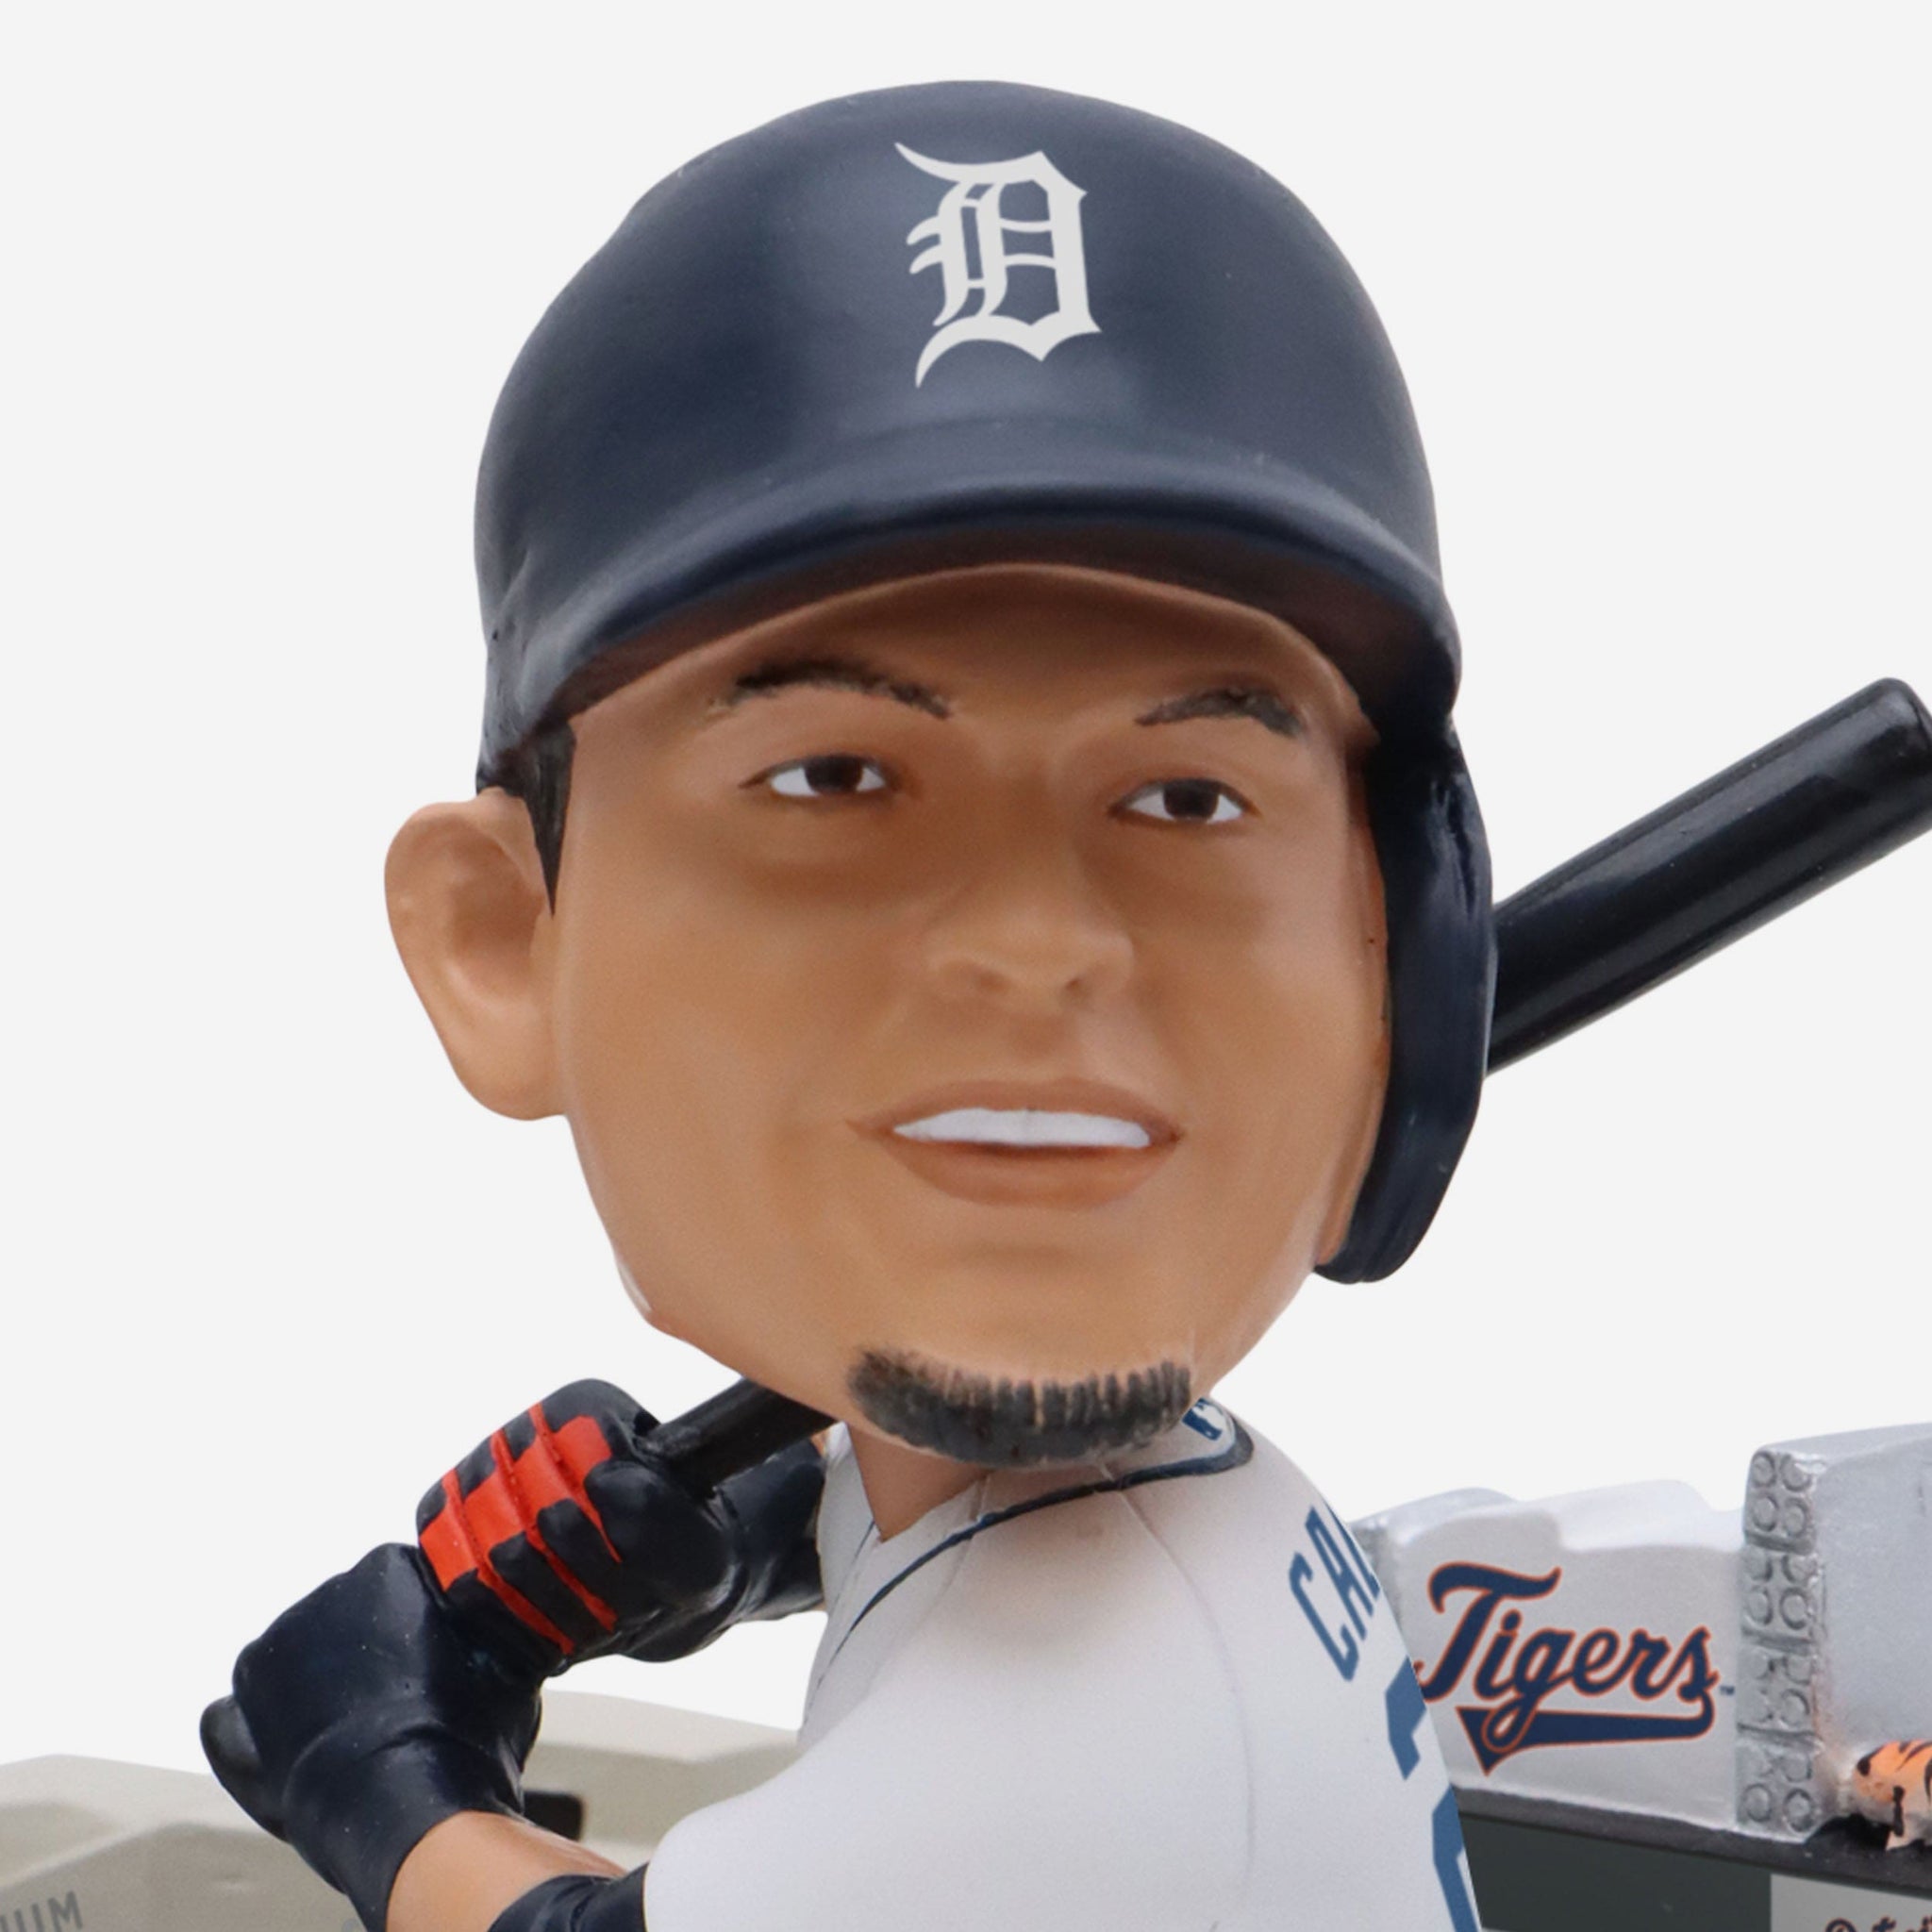 Detroit Tigers: Get your Miguel Cabrera All-Star Game shirt now